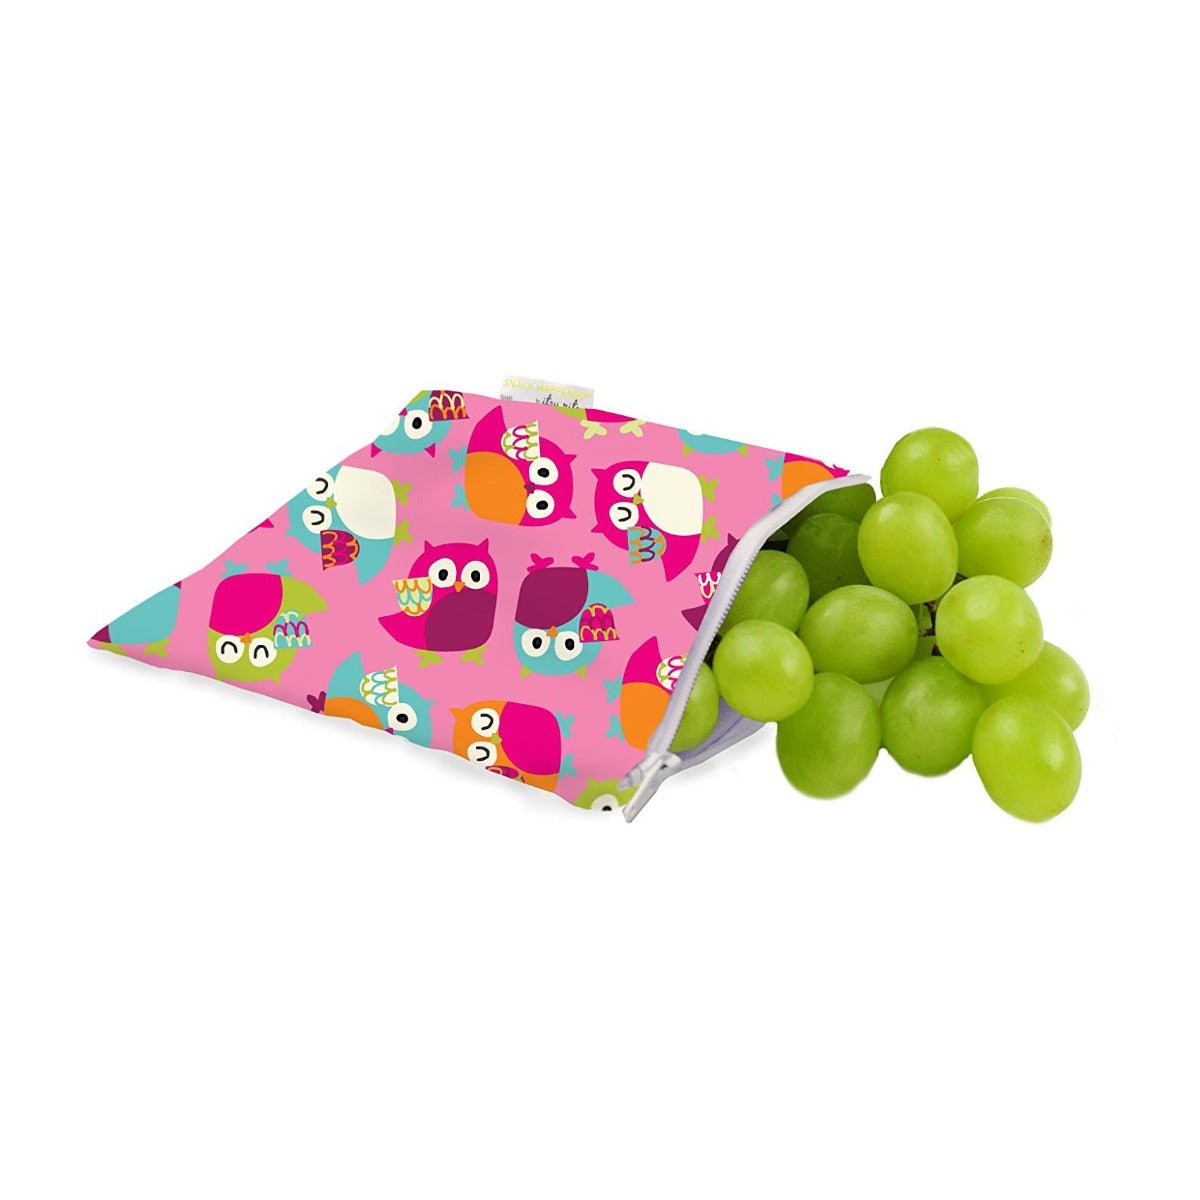 Itzy Ritzy Reusable Snack and Everything Bag